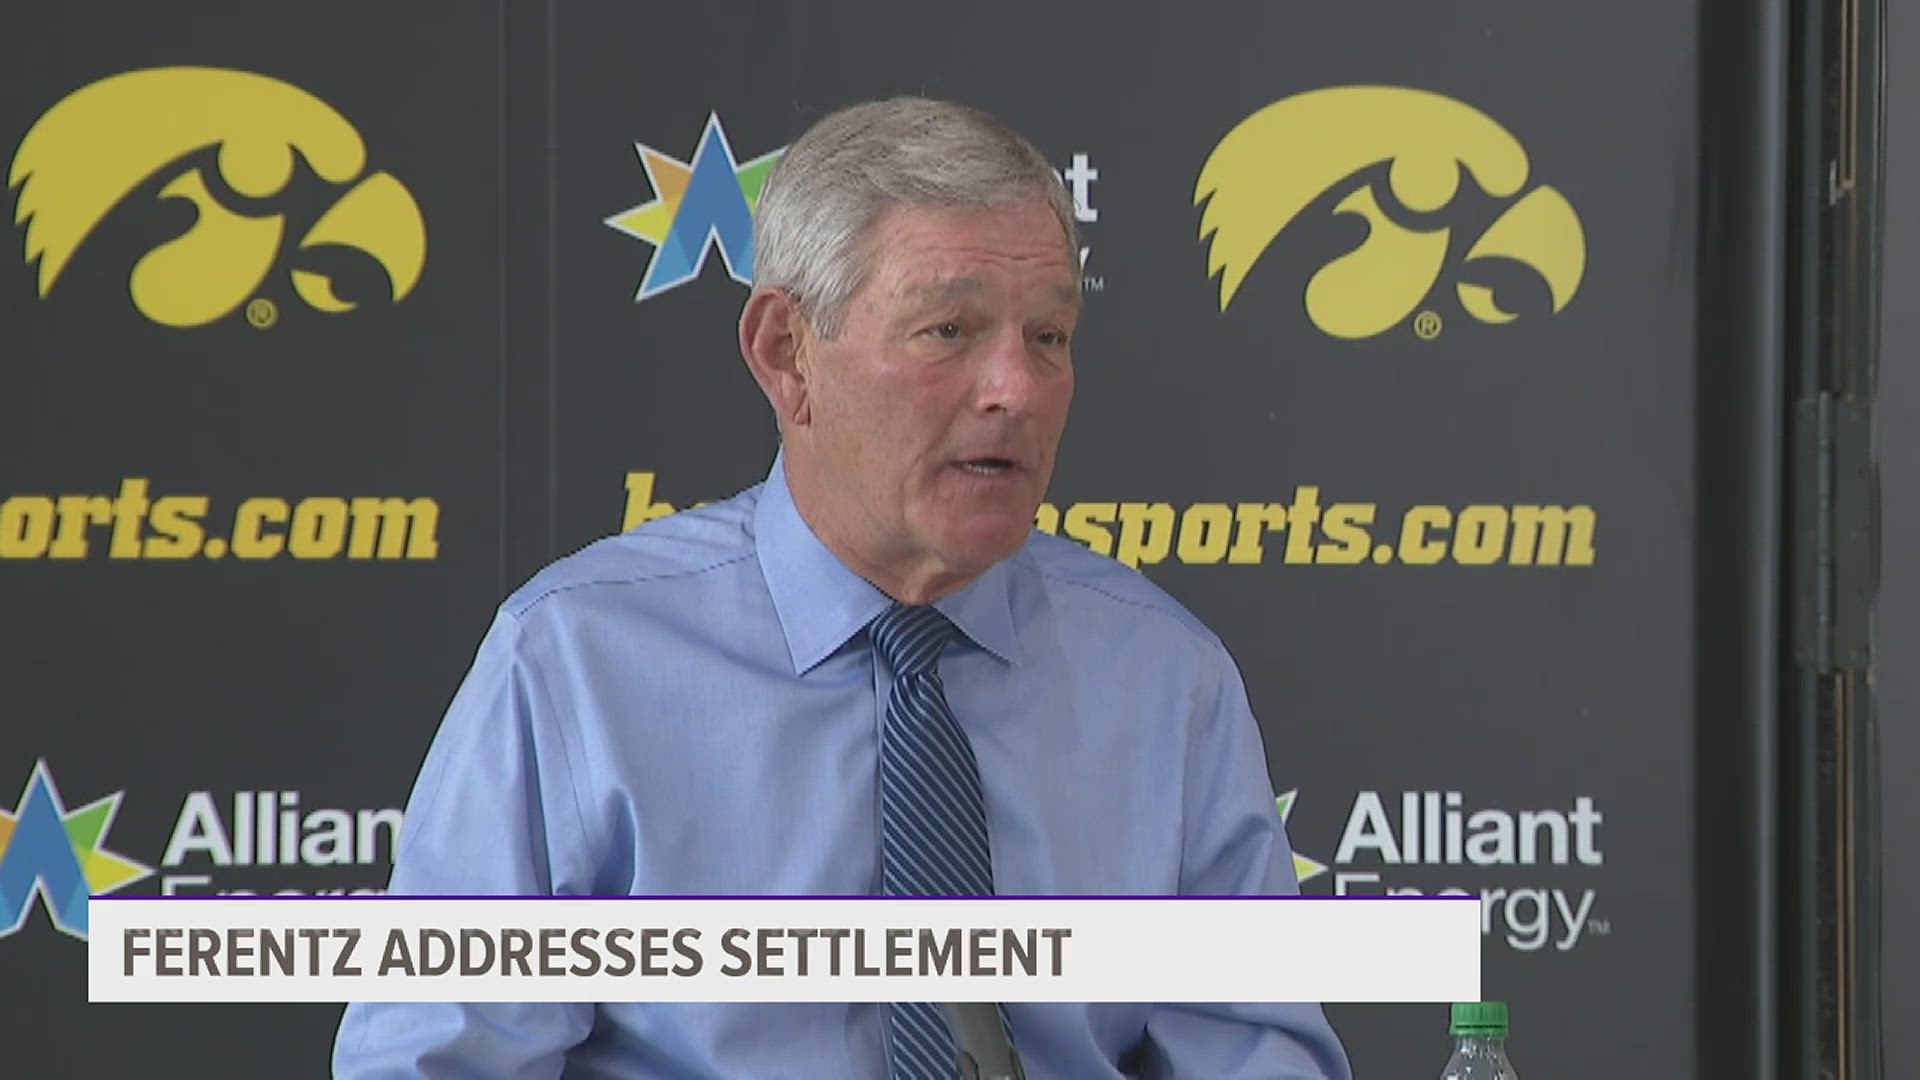 Ferentz addressed the media for the first time since the university reached the settlement.